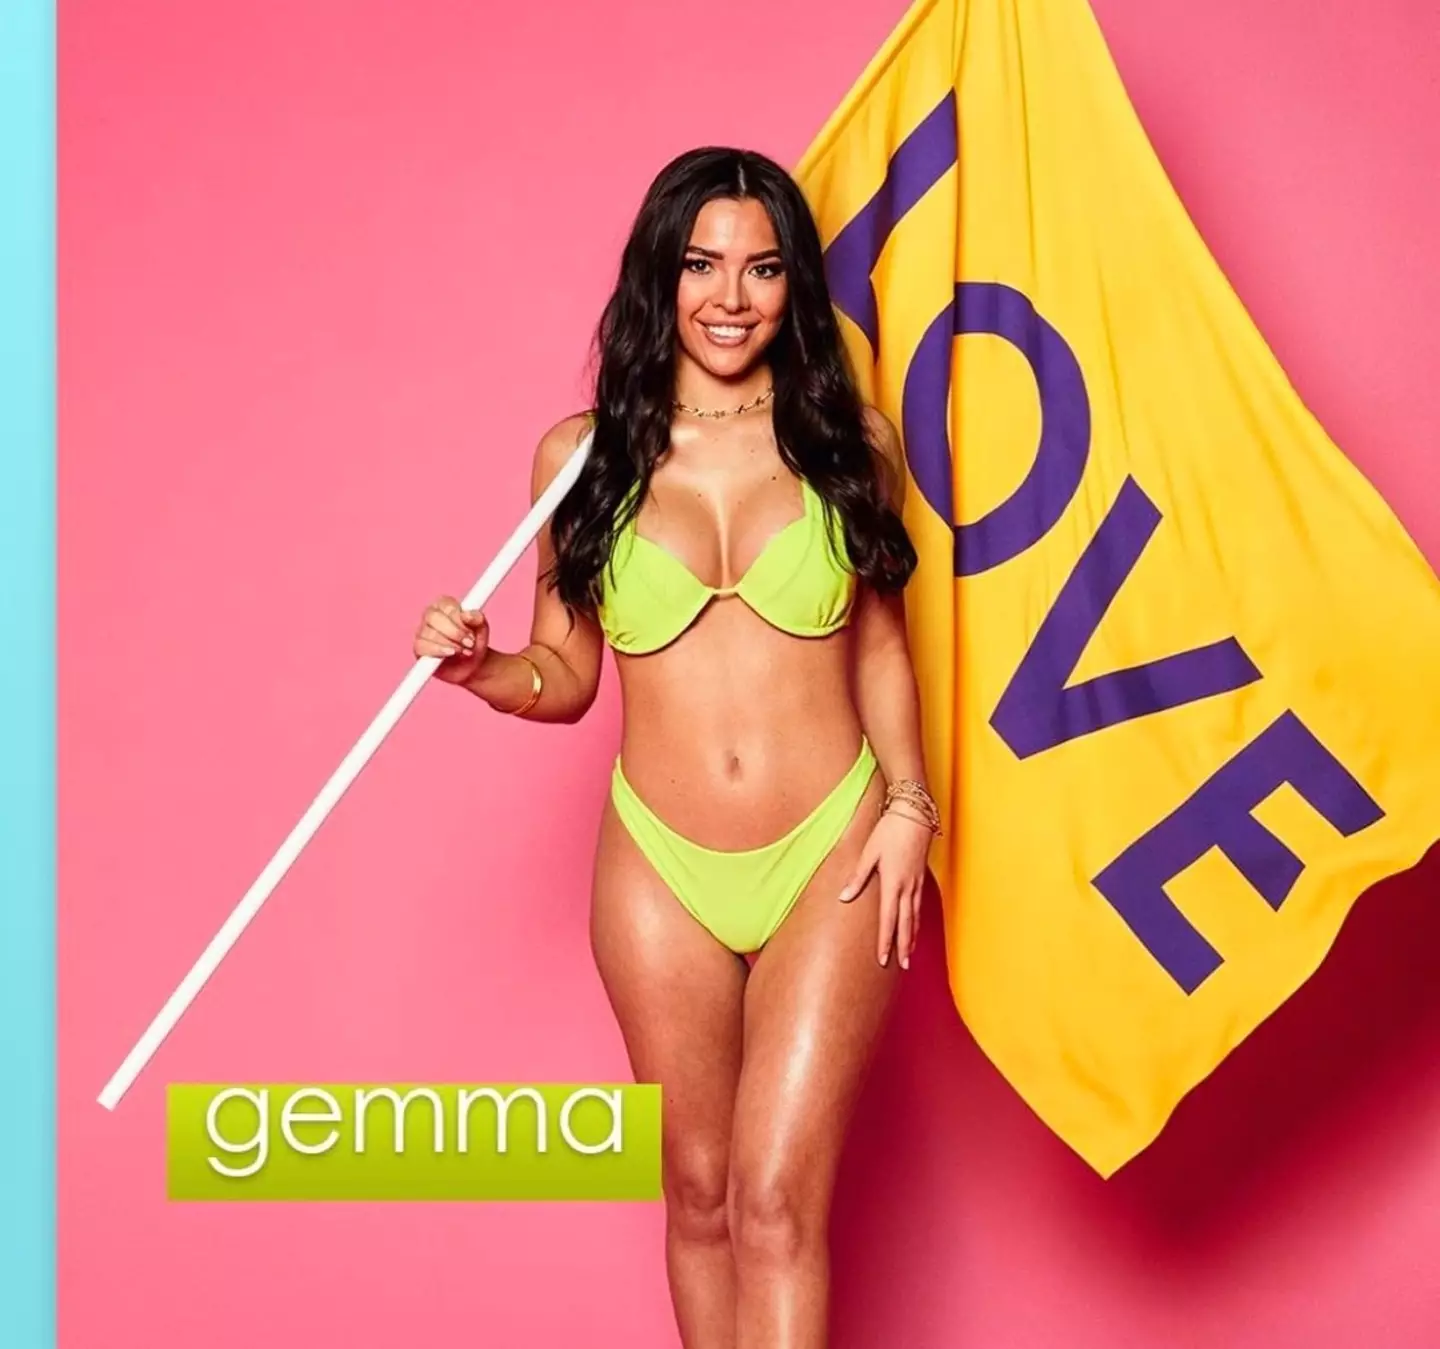 Gemma Owen’s family have spoken out following the backlash she has received since appearing on Love Island.